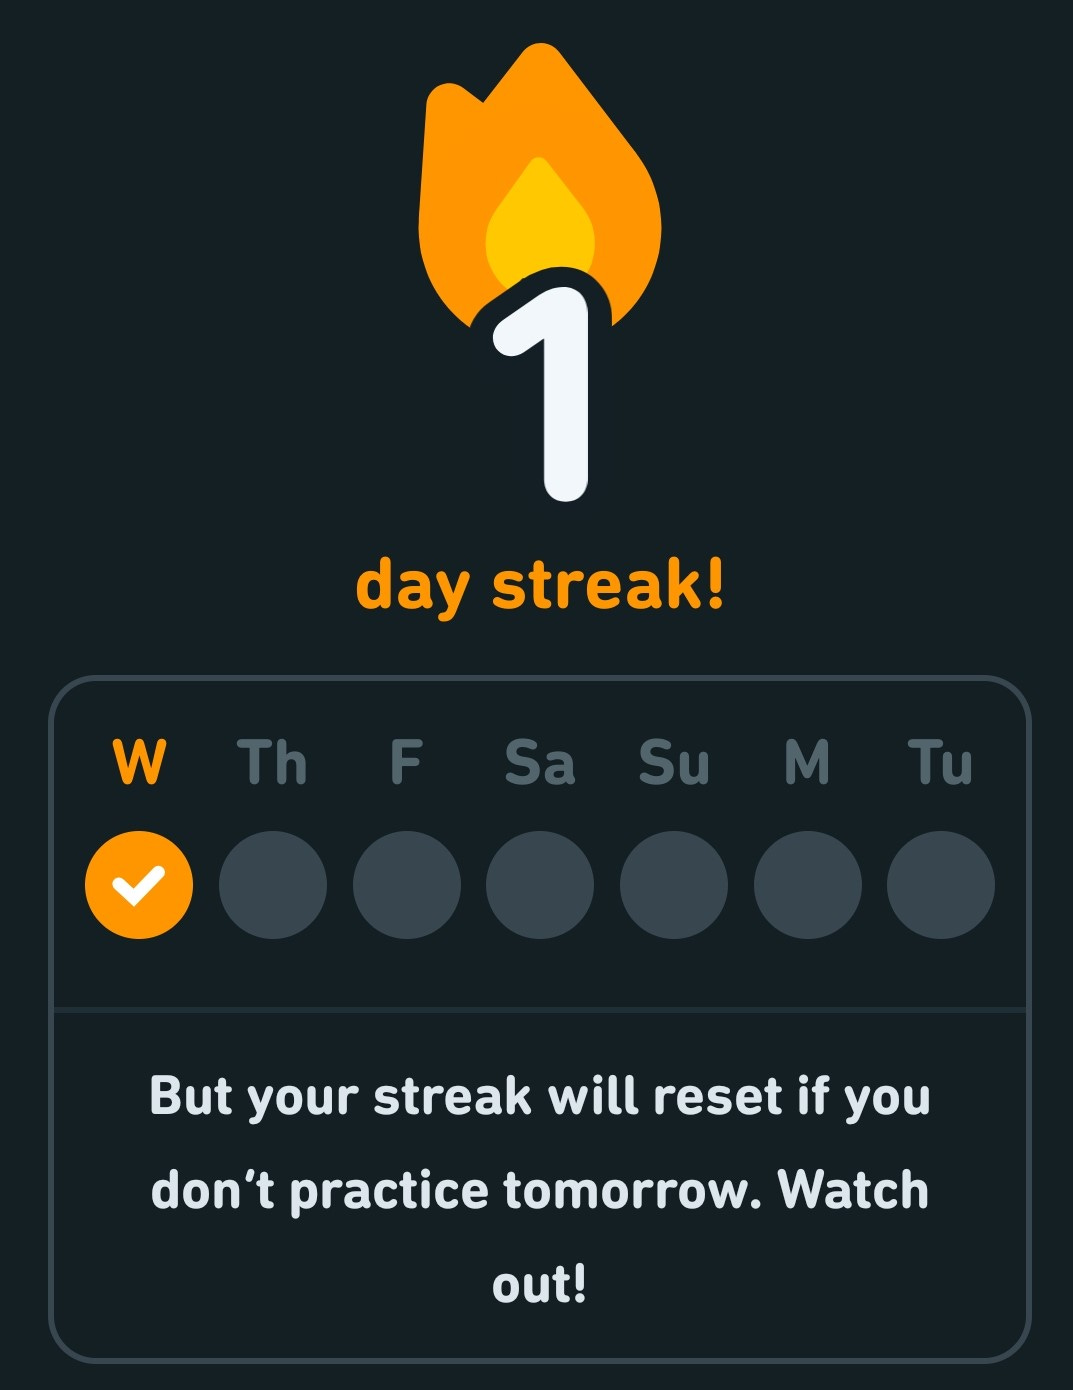 1 day streak! But your streak will reset if you don't practice tomorrow. Watch out!